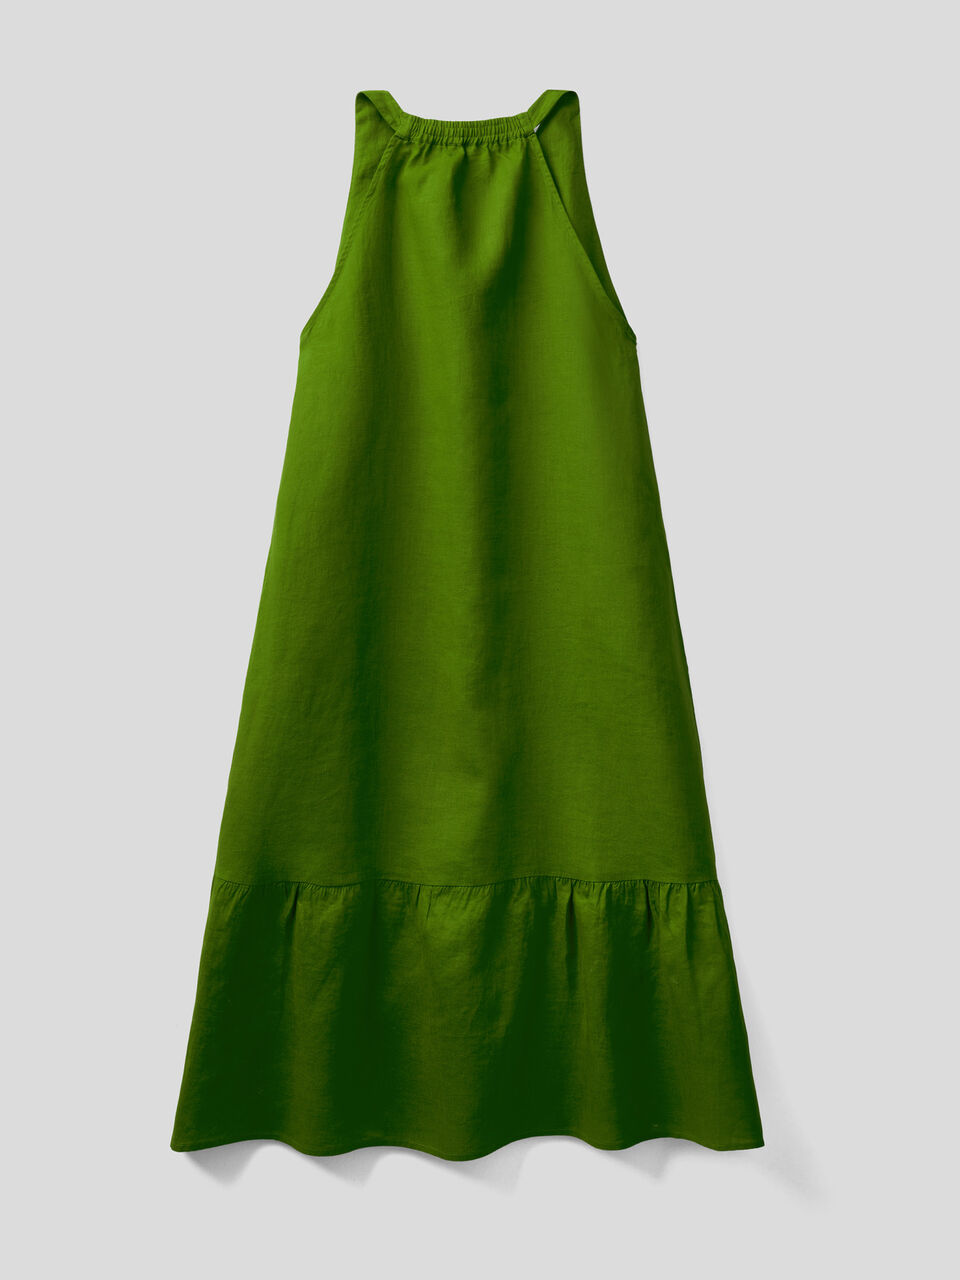 Mida Made in Italy ~Woman Size L~Light Green Sleeveless Cotton